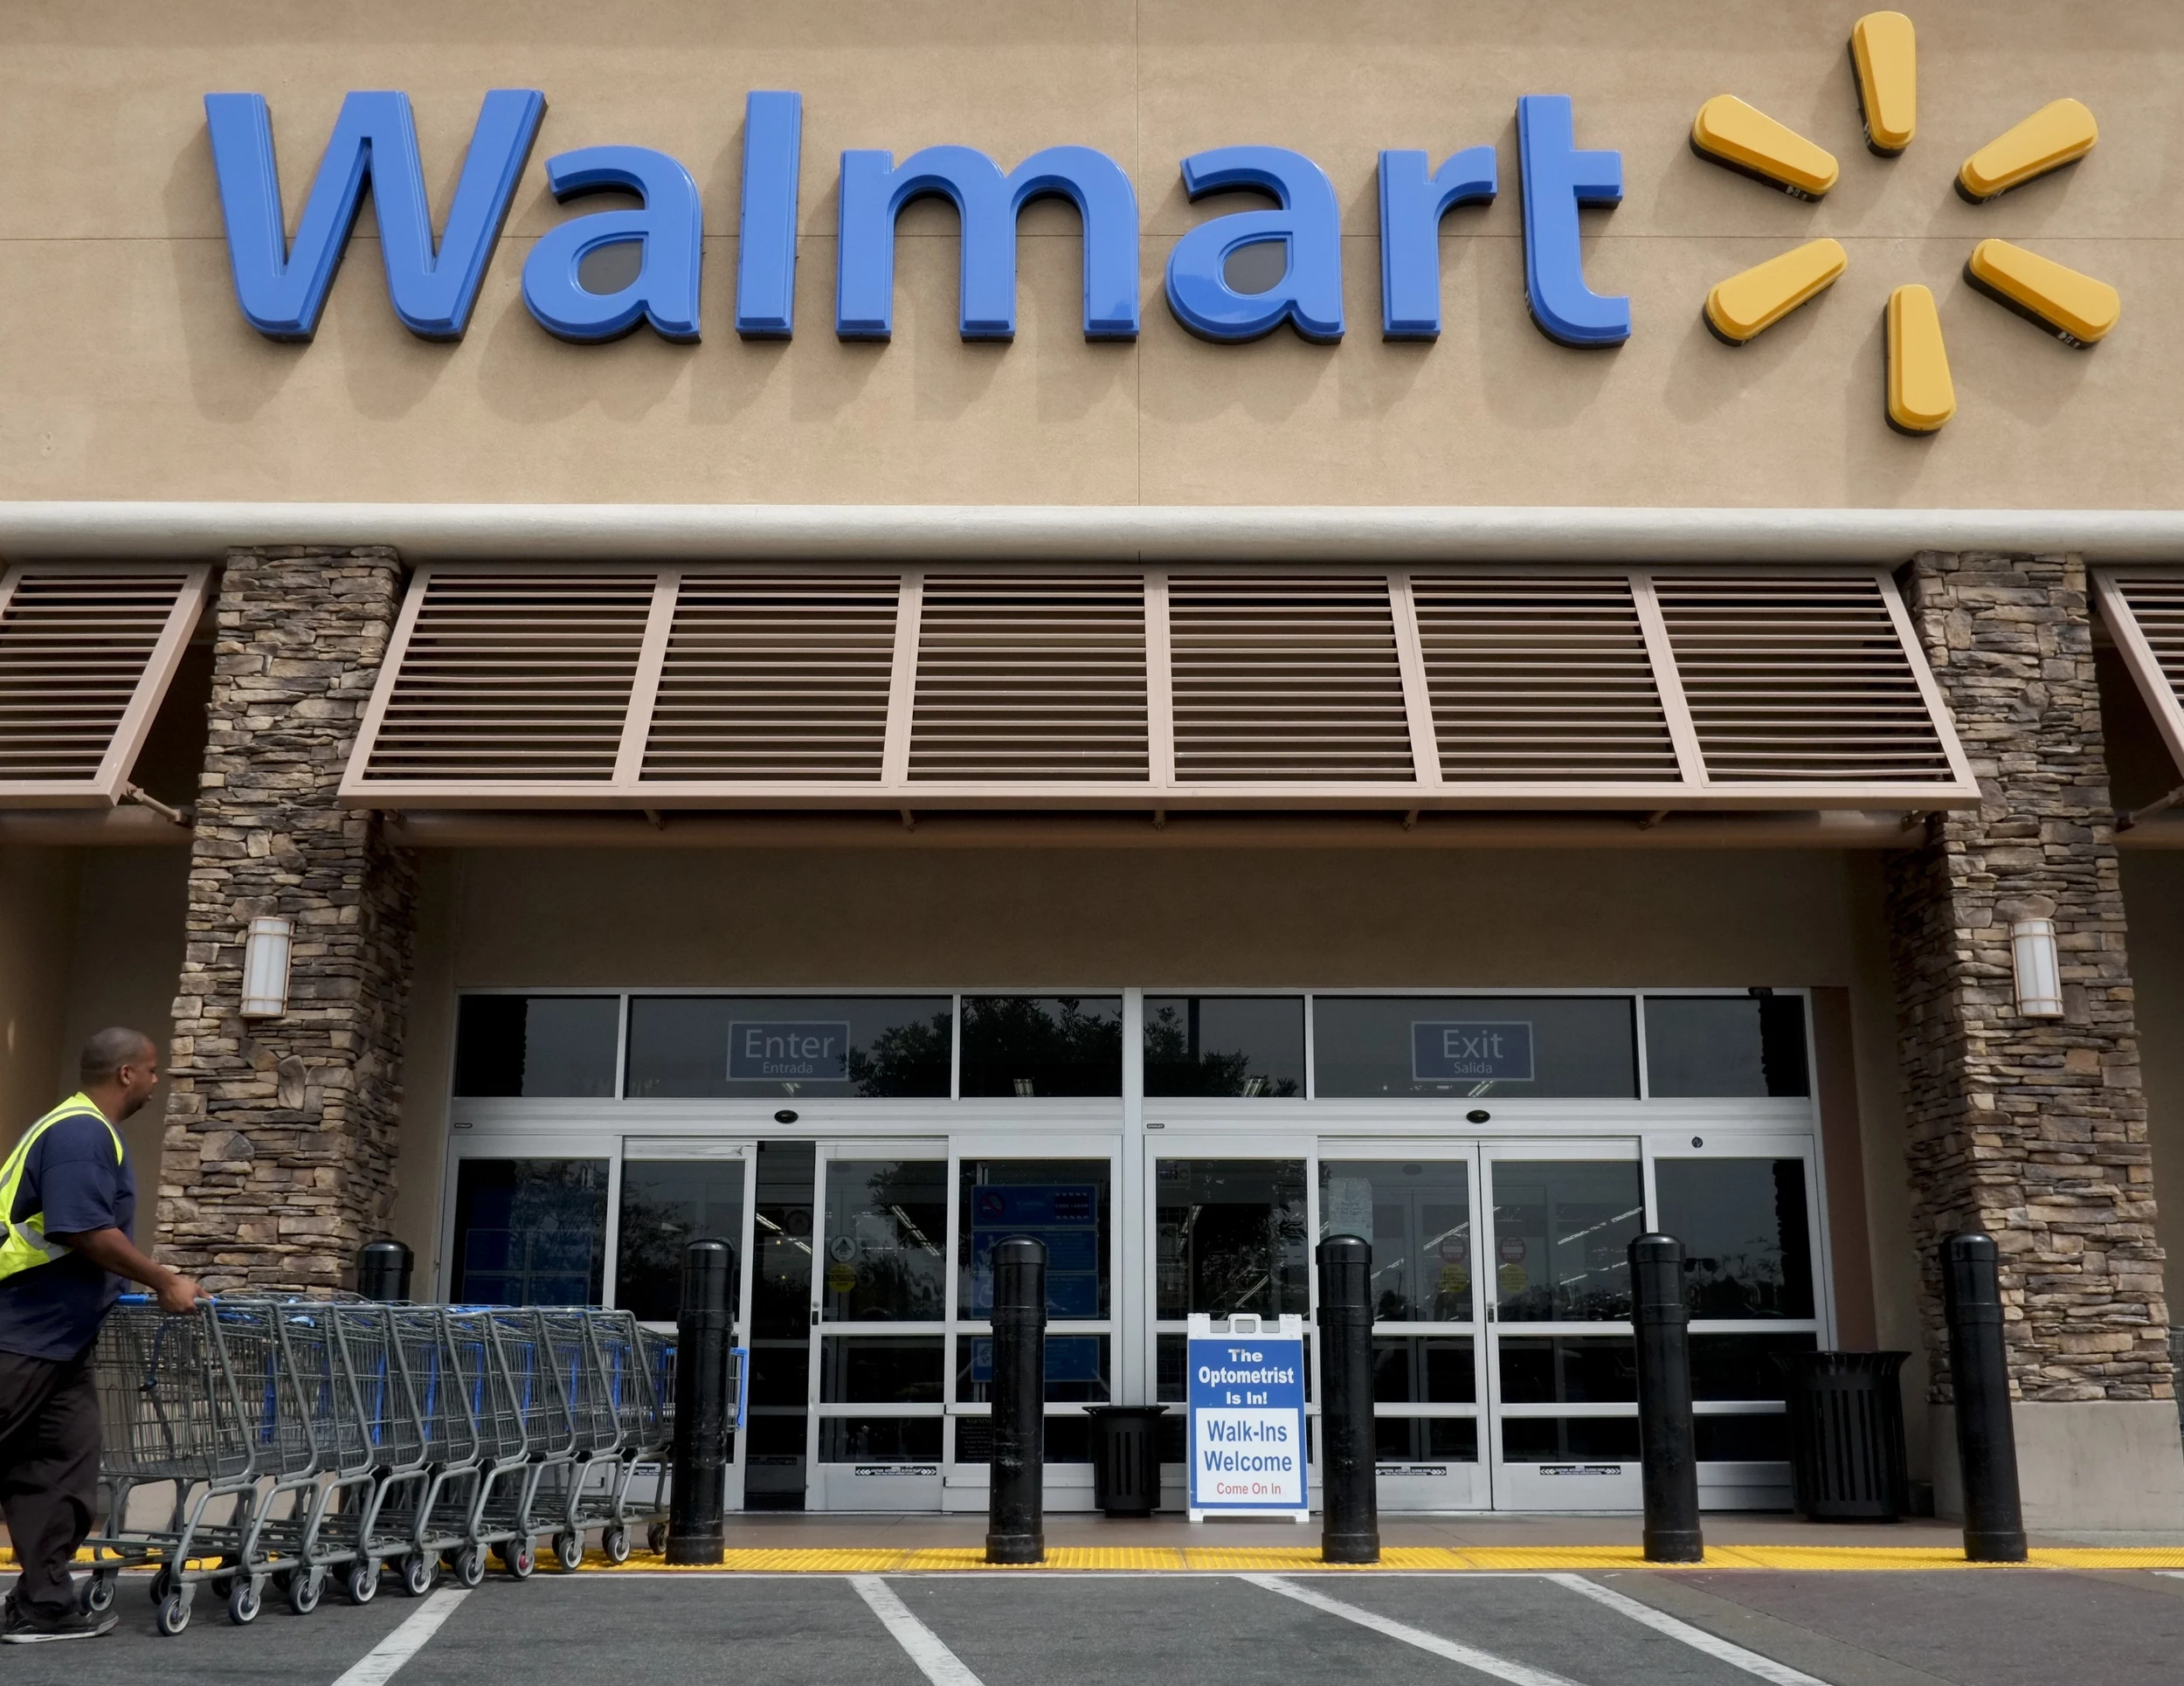 Walmart hours change: Stores to open at 6 a.m.; senior hours continue